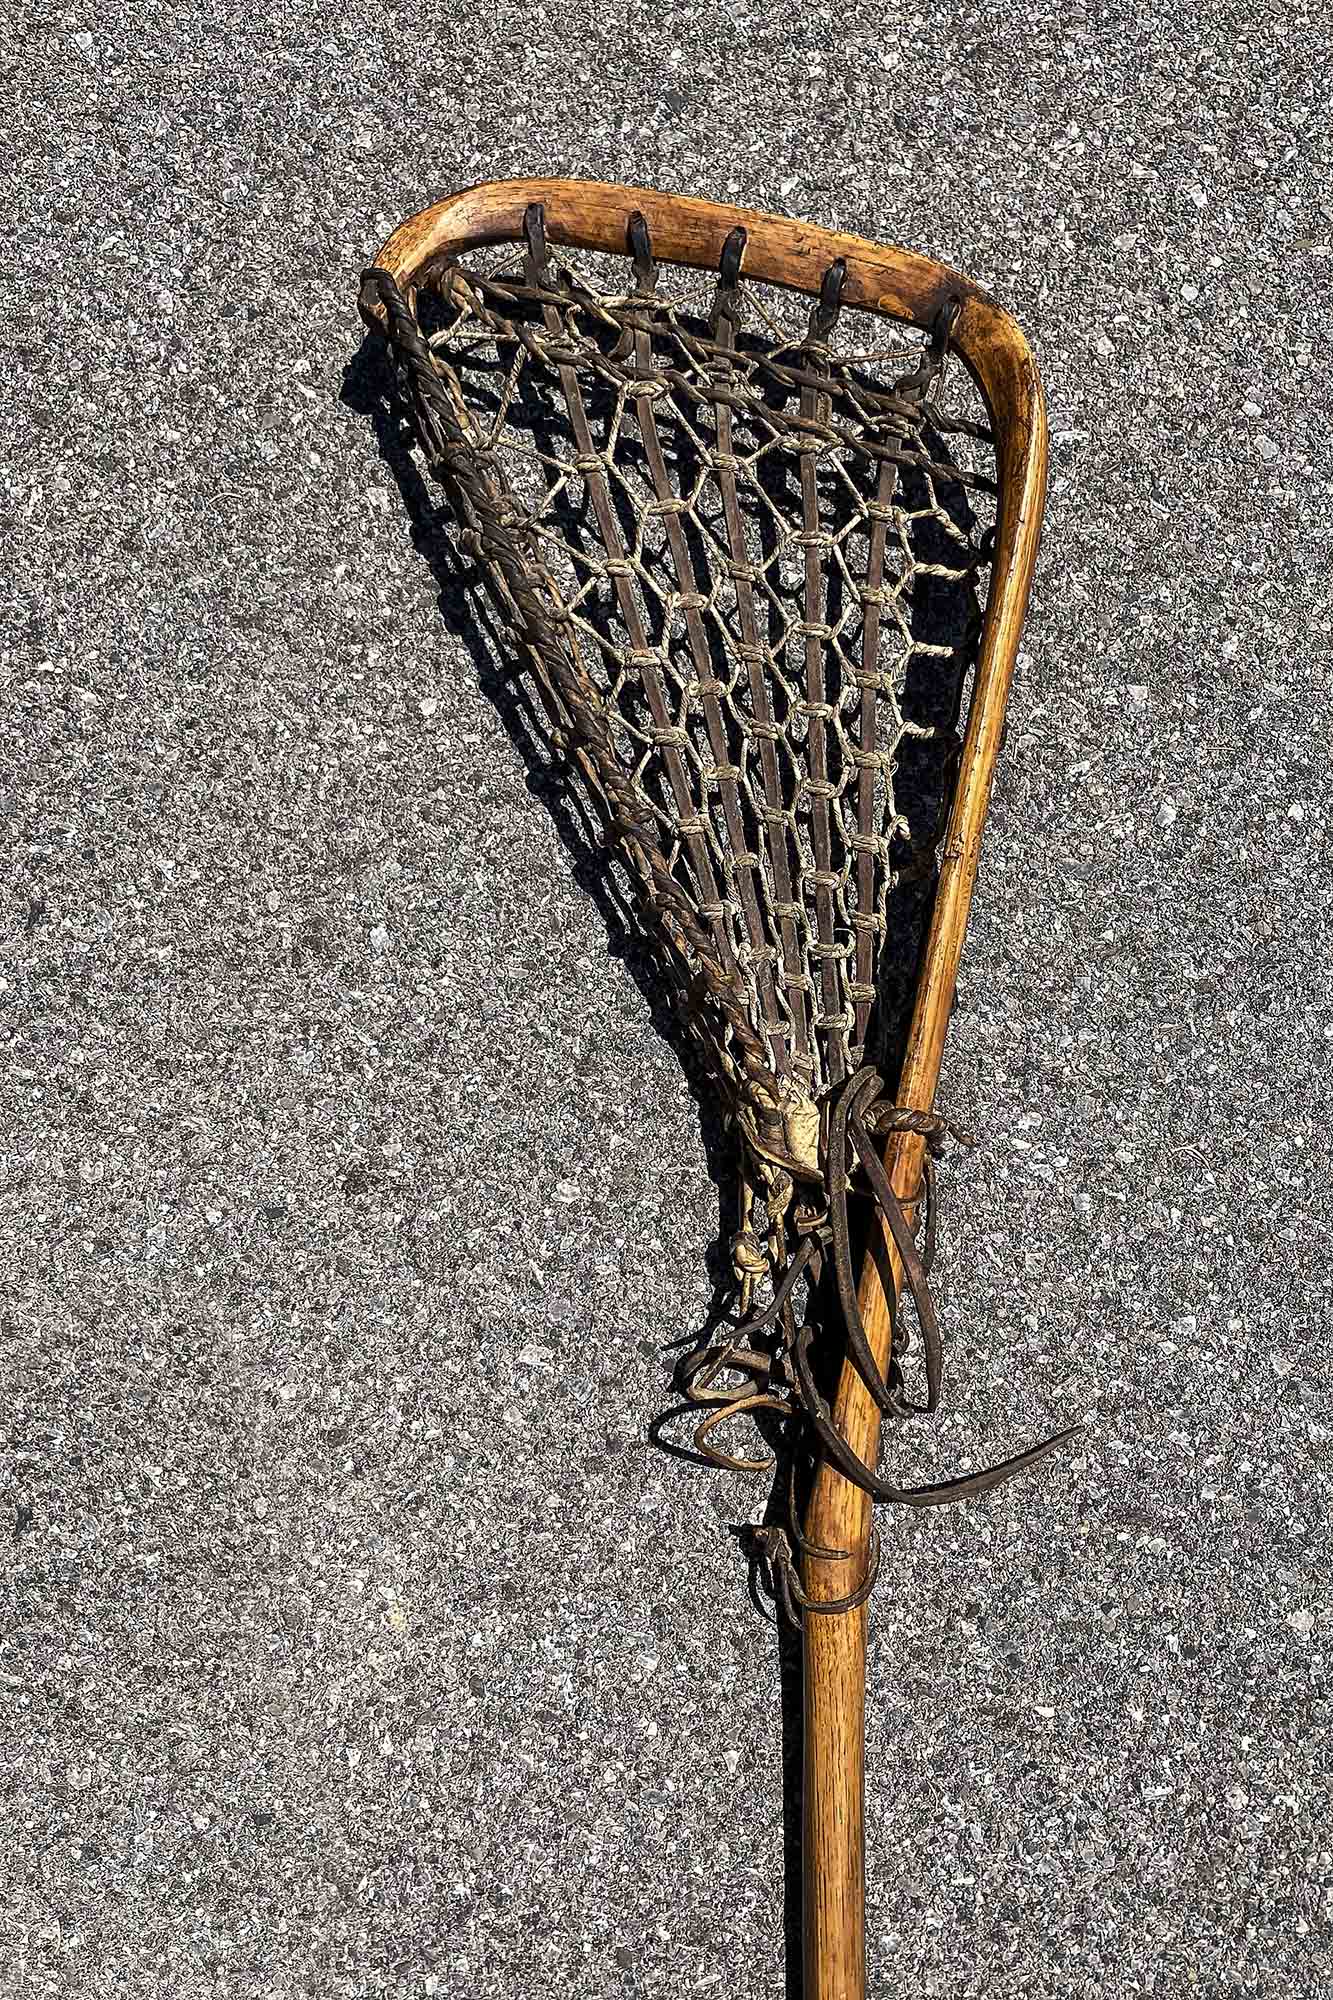 Up close view of a Lacrosse stick made from wood and old leather